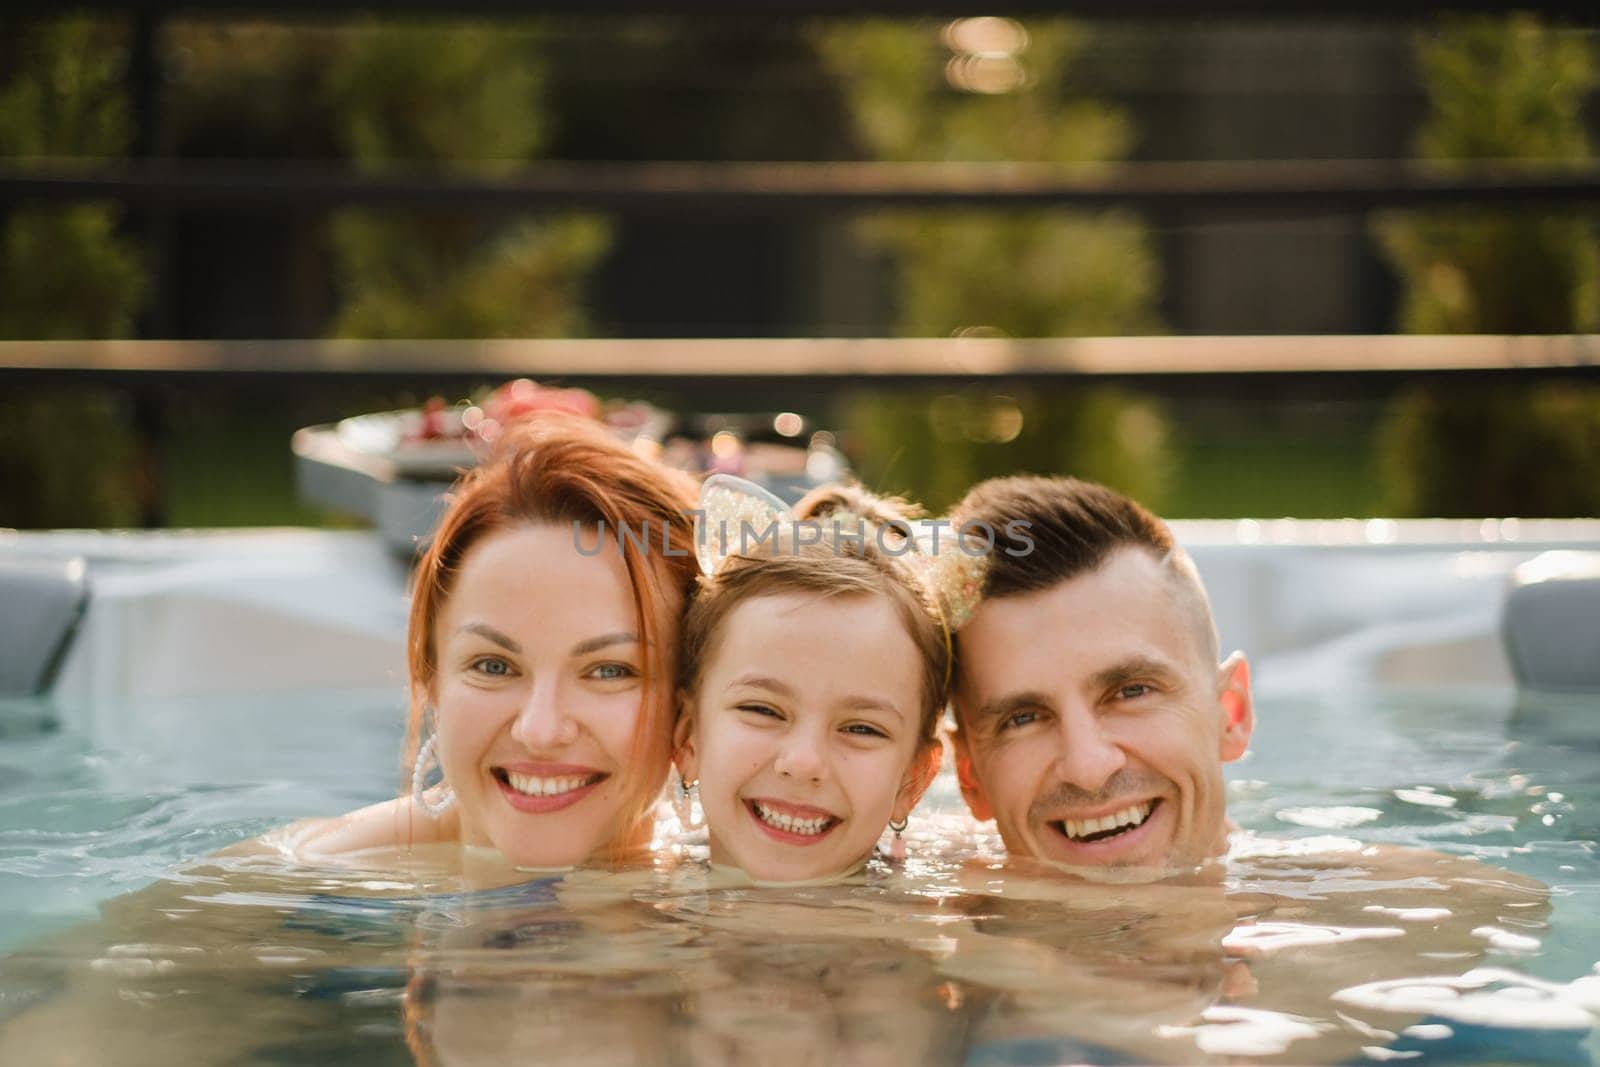 In summer, the family rests in the outdoor hot tub.